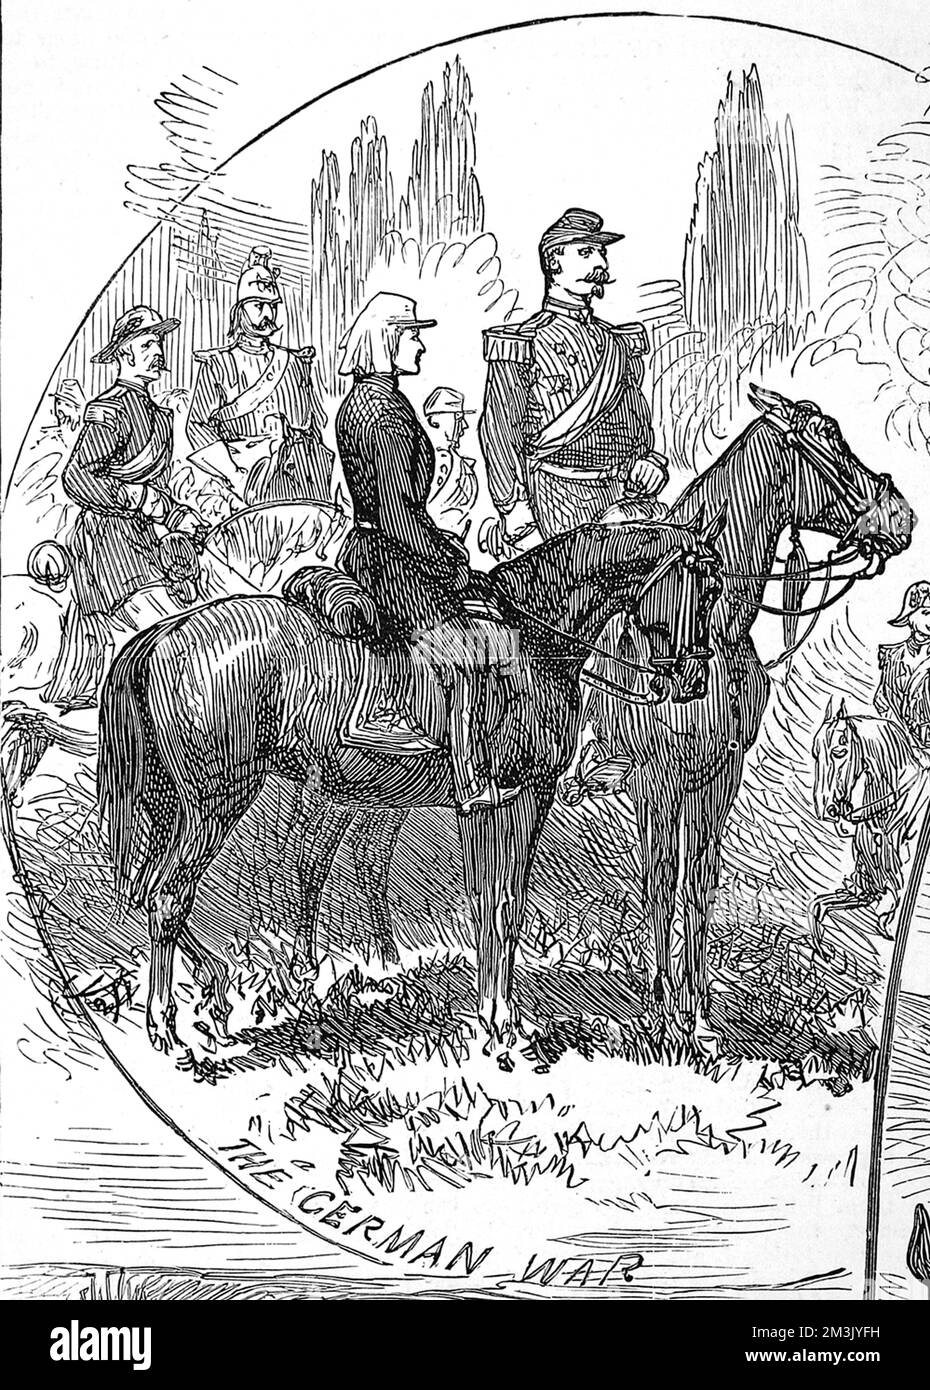 As a young man observing the Franco-Prussian war with his father. The Prince Imperial is shown on horseback, in uniform, with his father Louis Napoleon.     Date: 1879 Stock Photo